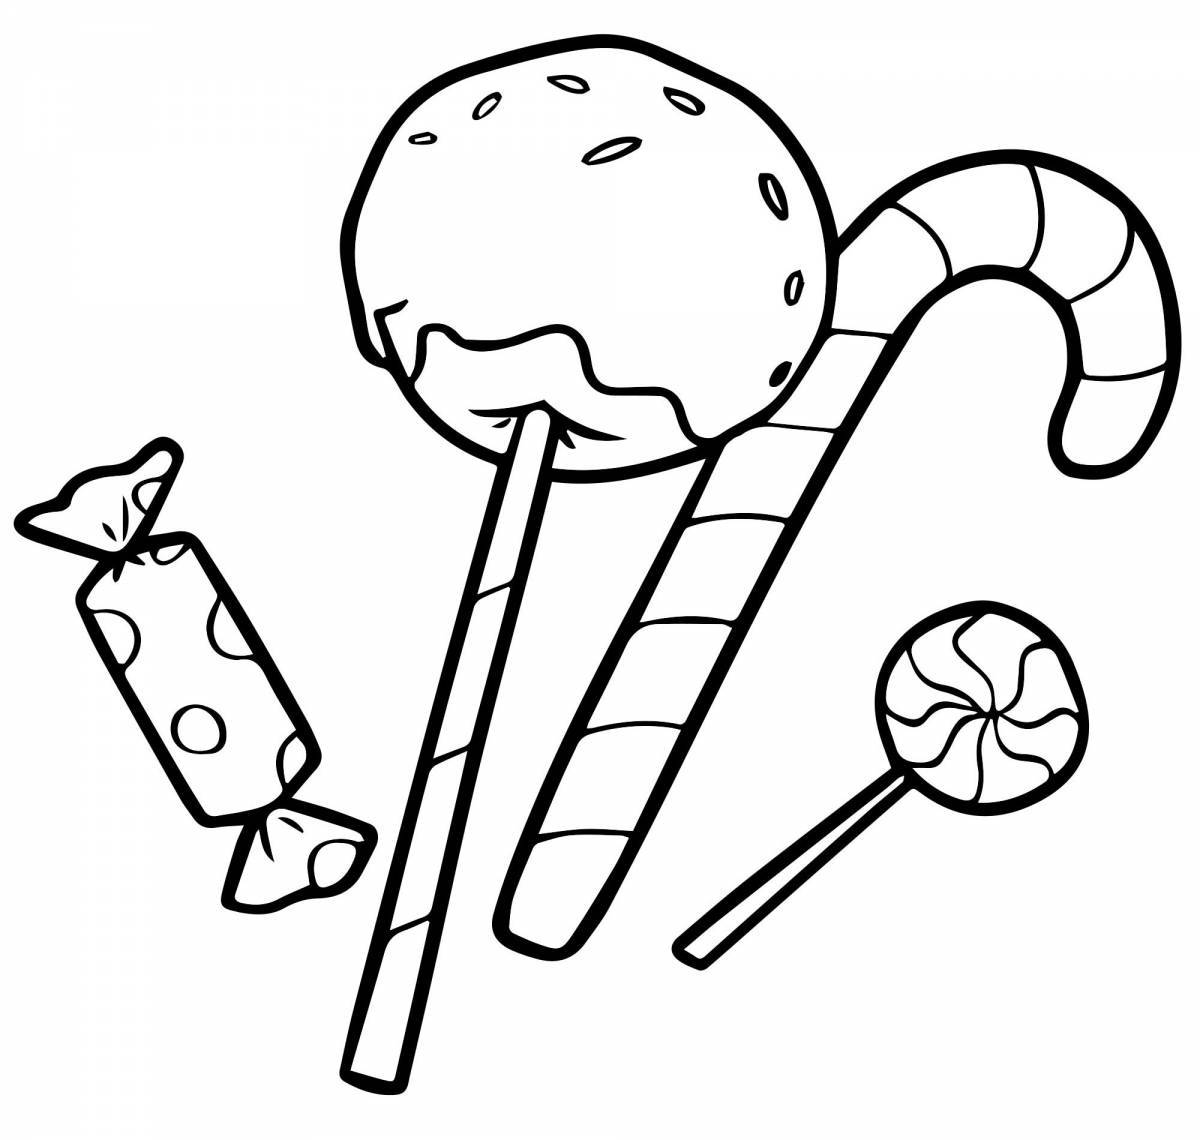 Taunting candy coloring pages